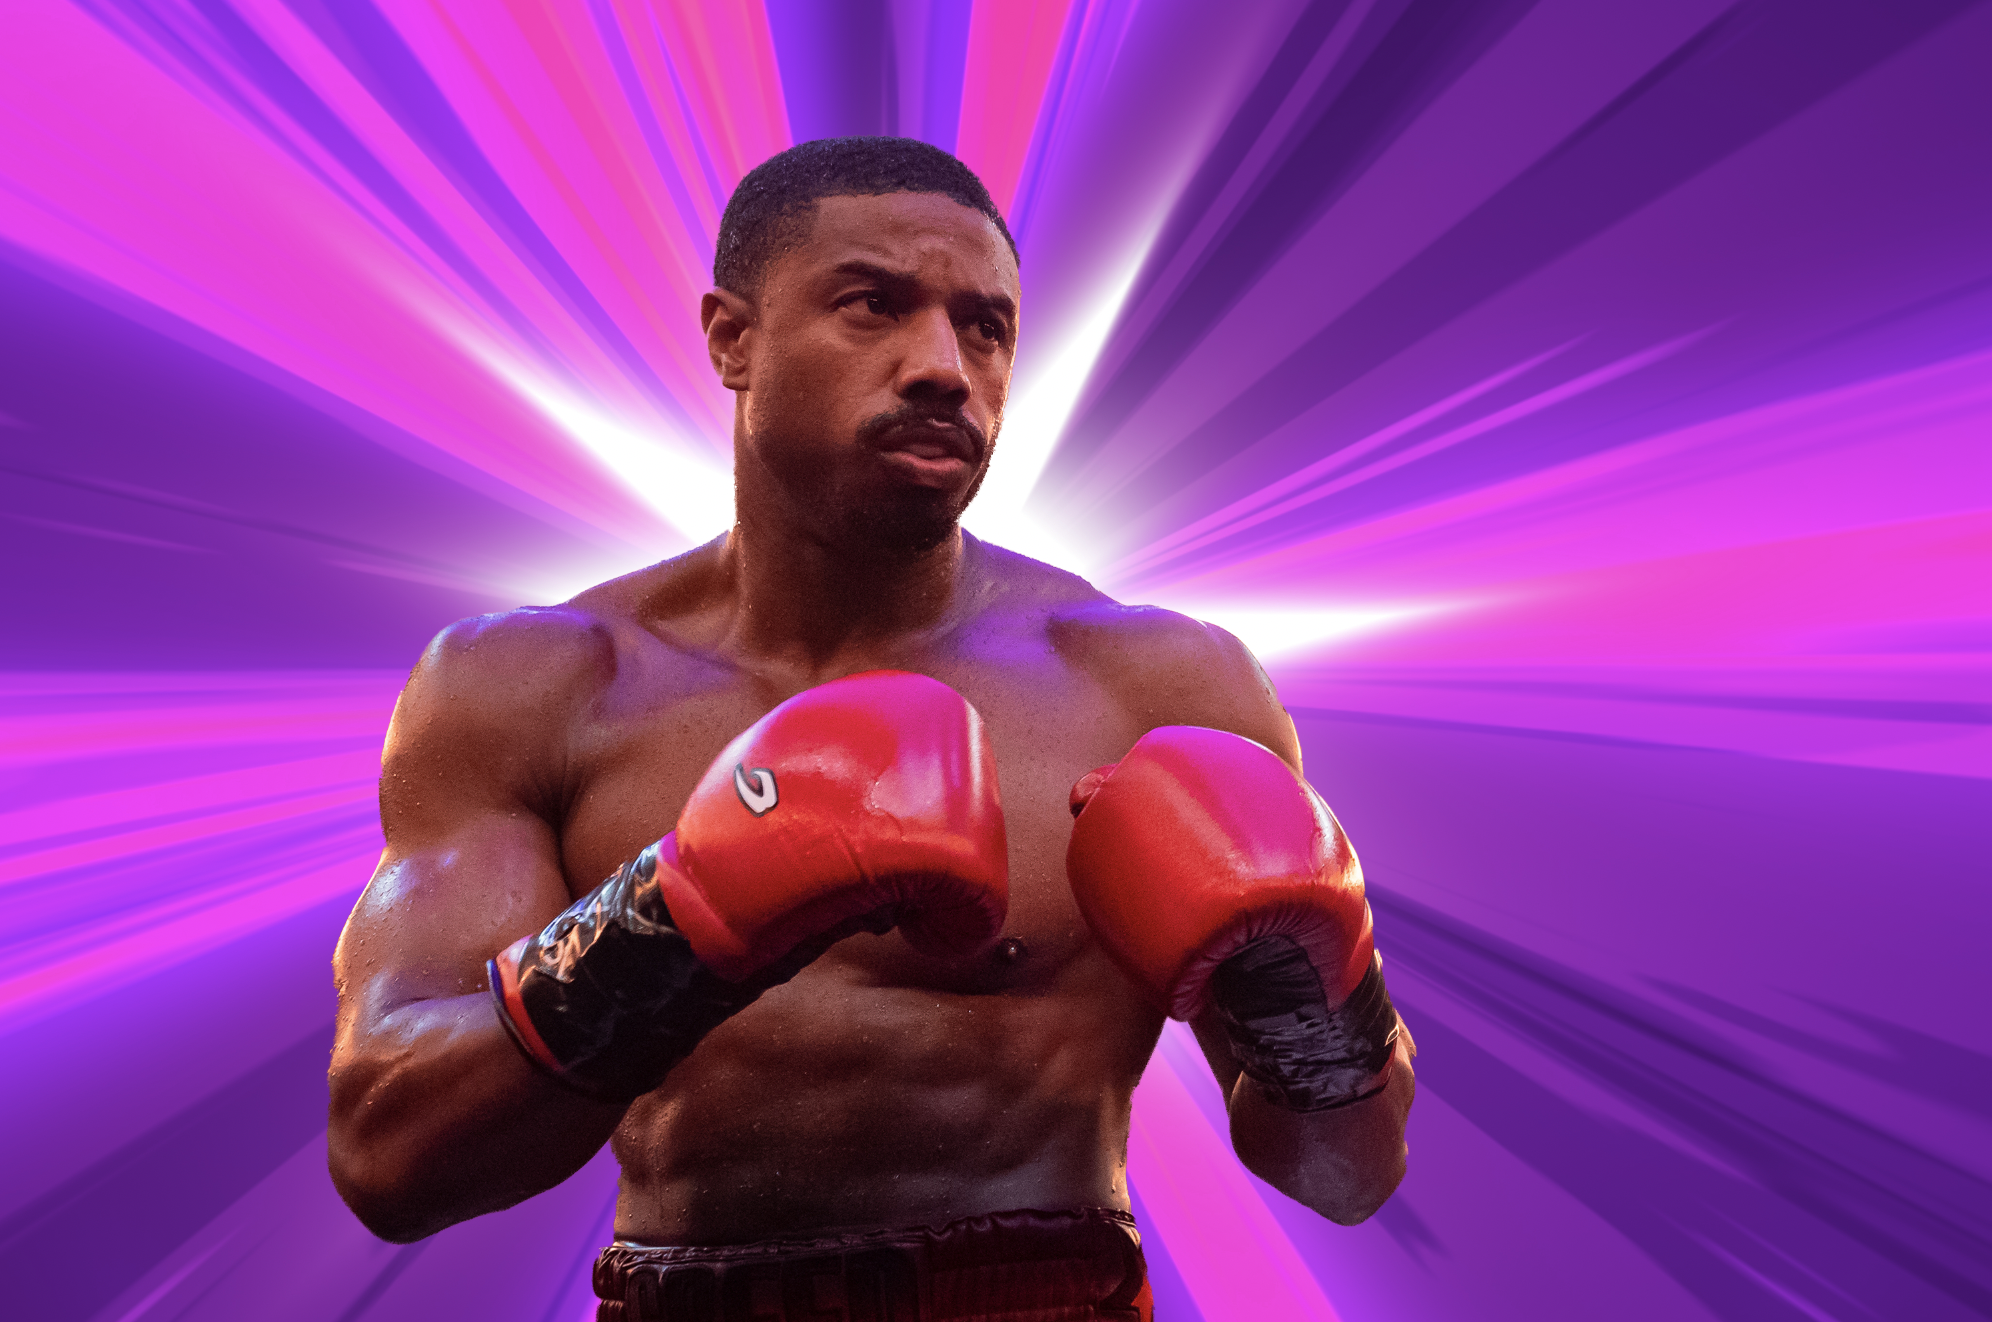 Michael B. Jordan’s Creed standing with shirt off and boxing gloves with an anime-style purple light explosion happening behind him